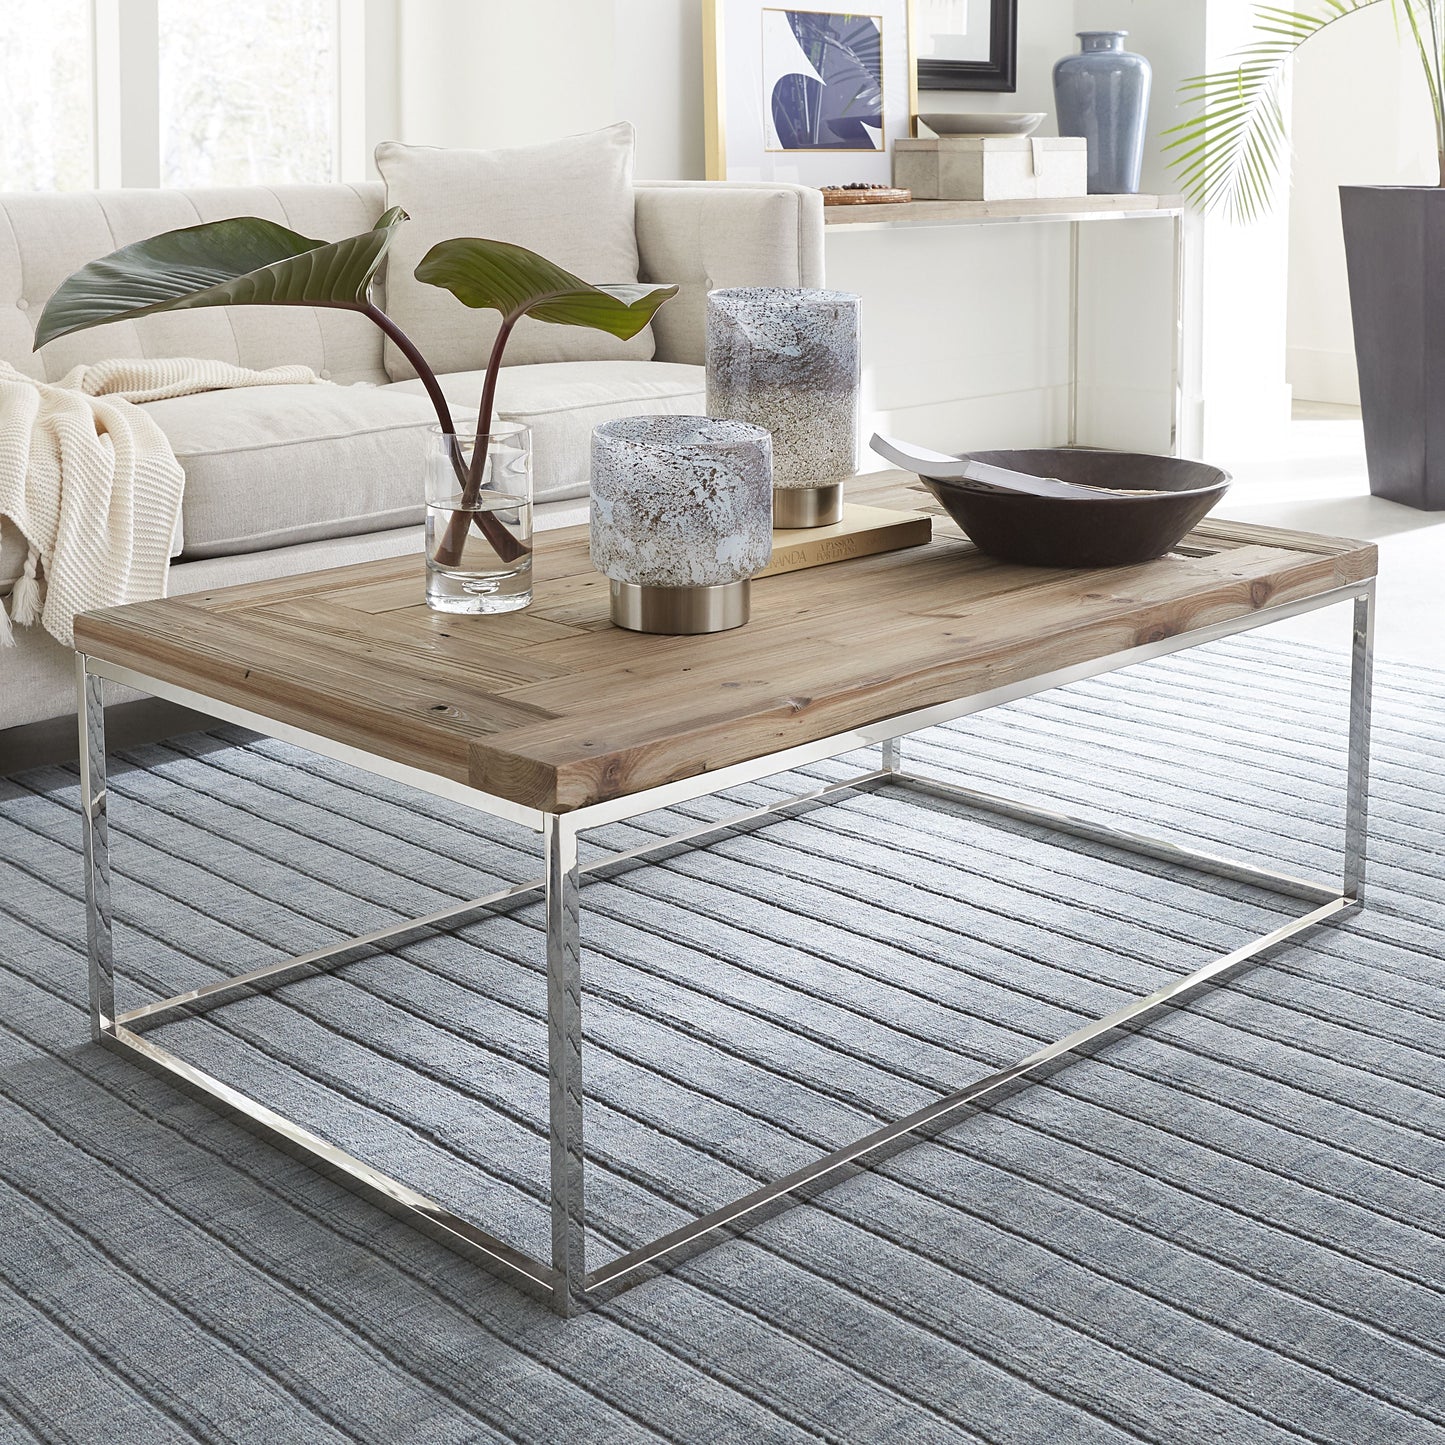 Modus Ace Reclaimed Wood Coffee Table in Natural